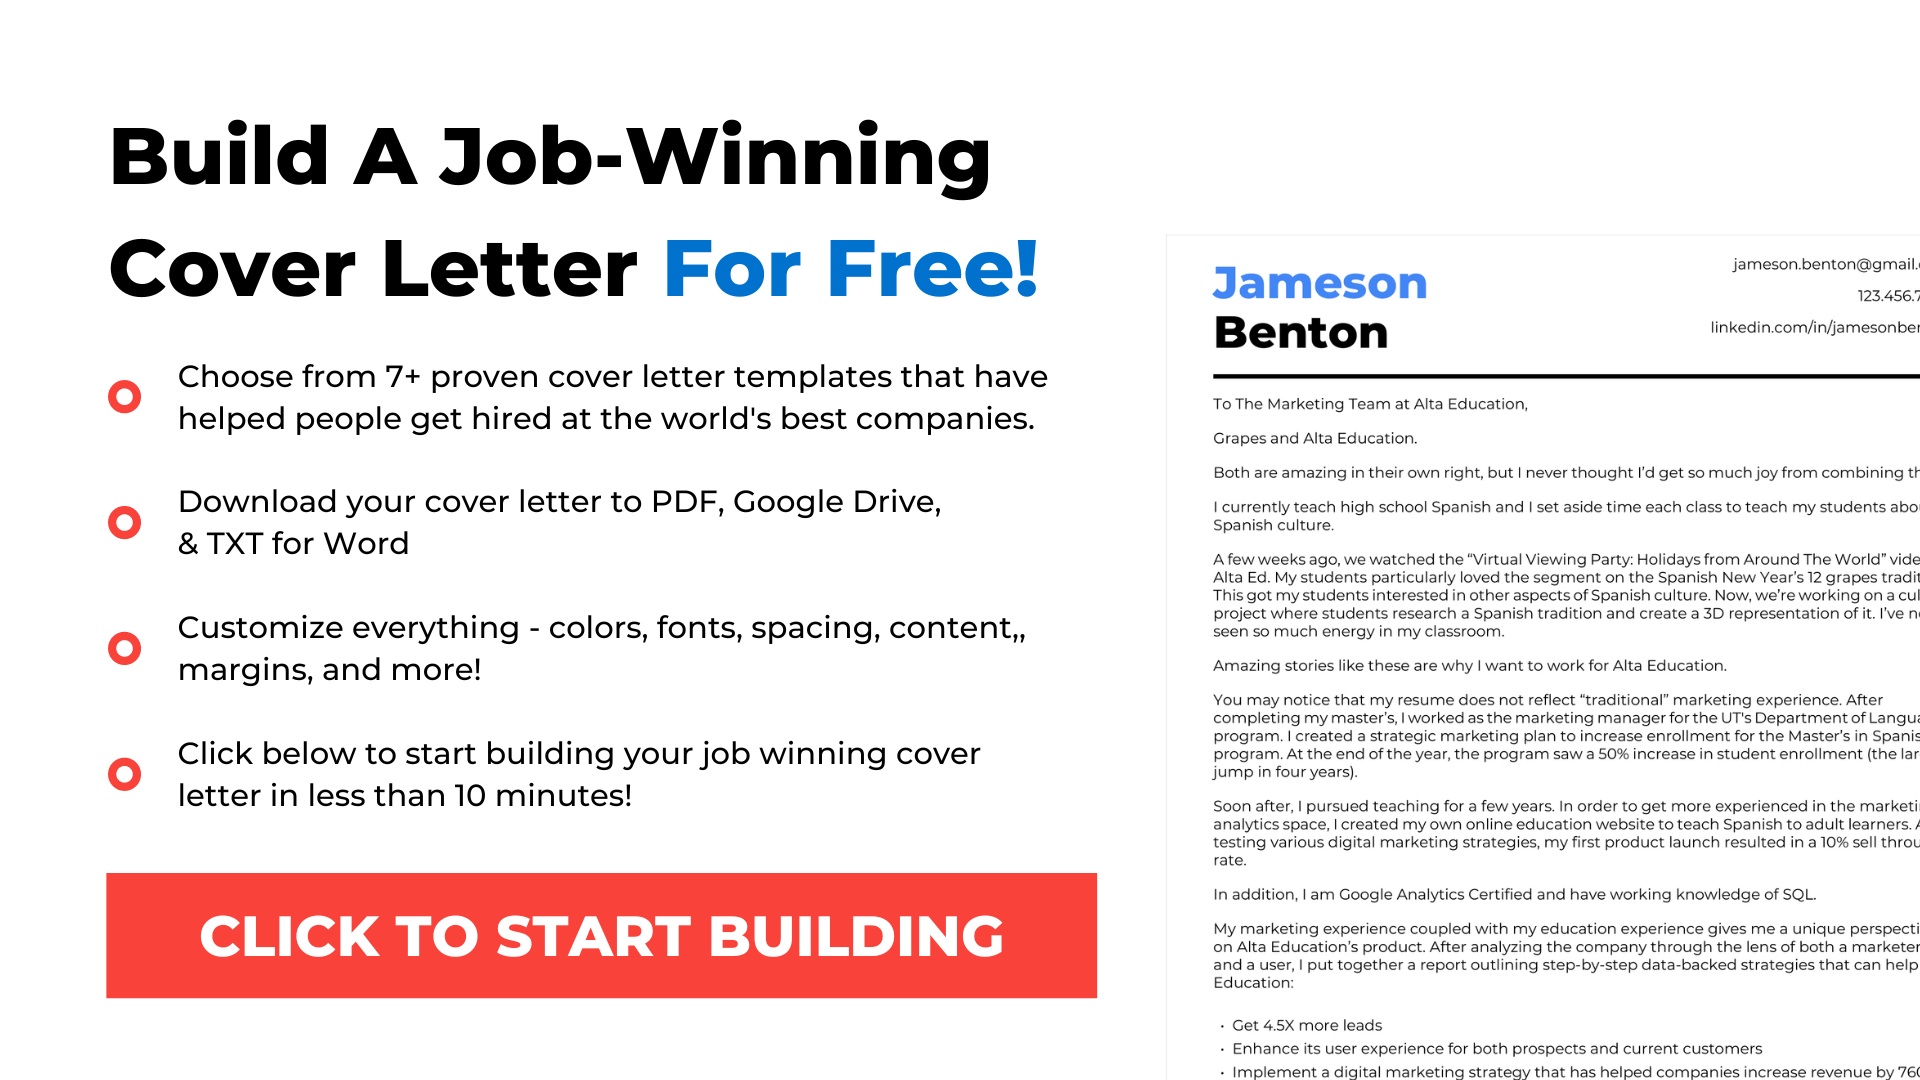 CoverBuild.io - Proven Cover Letter Templates To Build A Job Winning Cover Letter In 10 Minutes Or Less